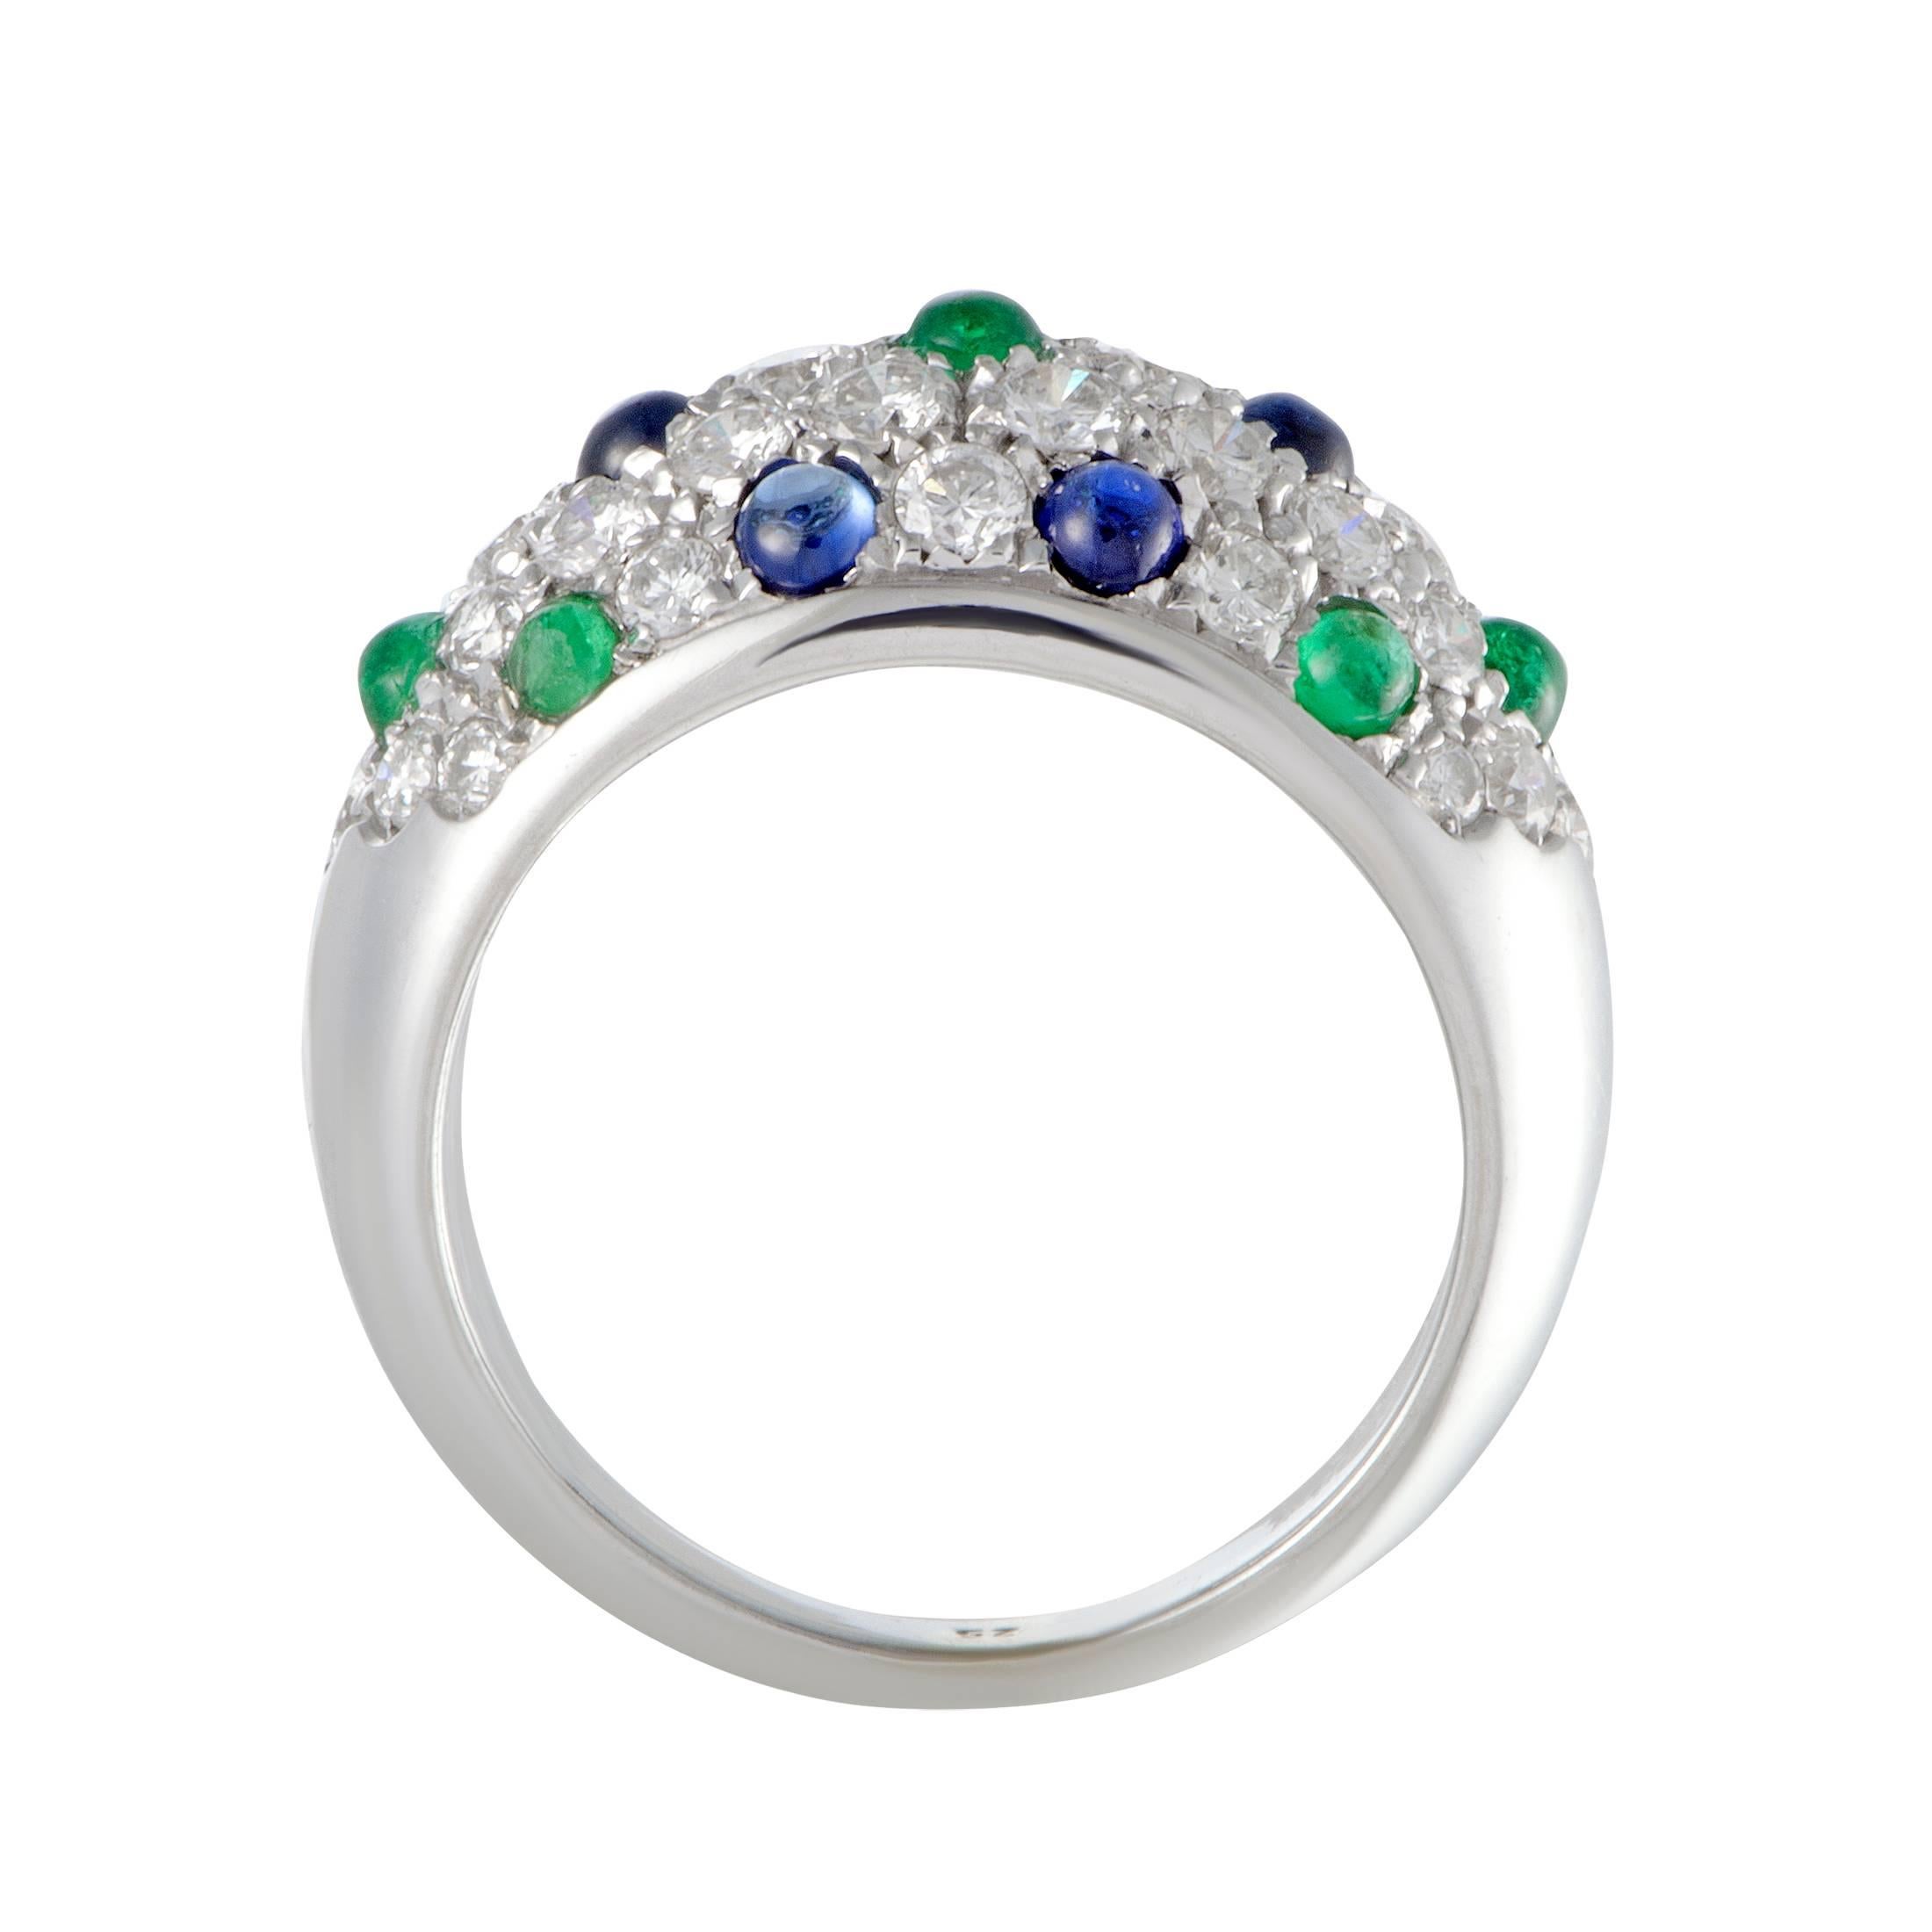 This elegant 18K white gold ring by Cartier features an exquisitely captivating style. The remarkable ring is adorned in 1.75ct of dazzling diamonds, 0.50ct of mesmerizing green emeralds and 0.75ct of stunning blue sapphires that accentuate the